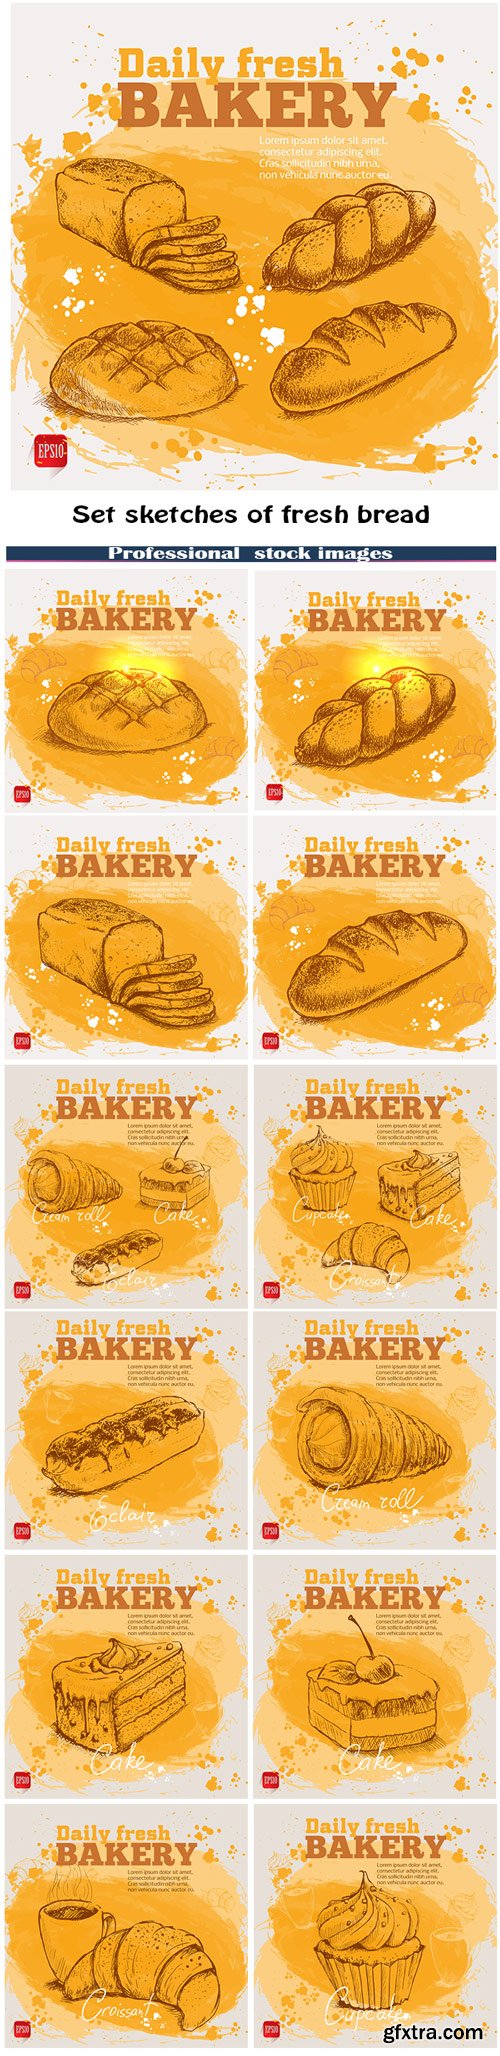 Set sketches of fresh bread on yellow watercolor background